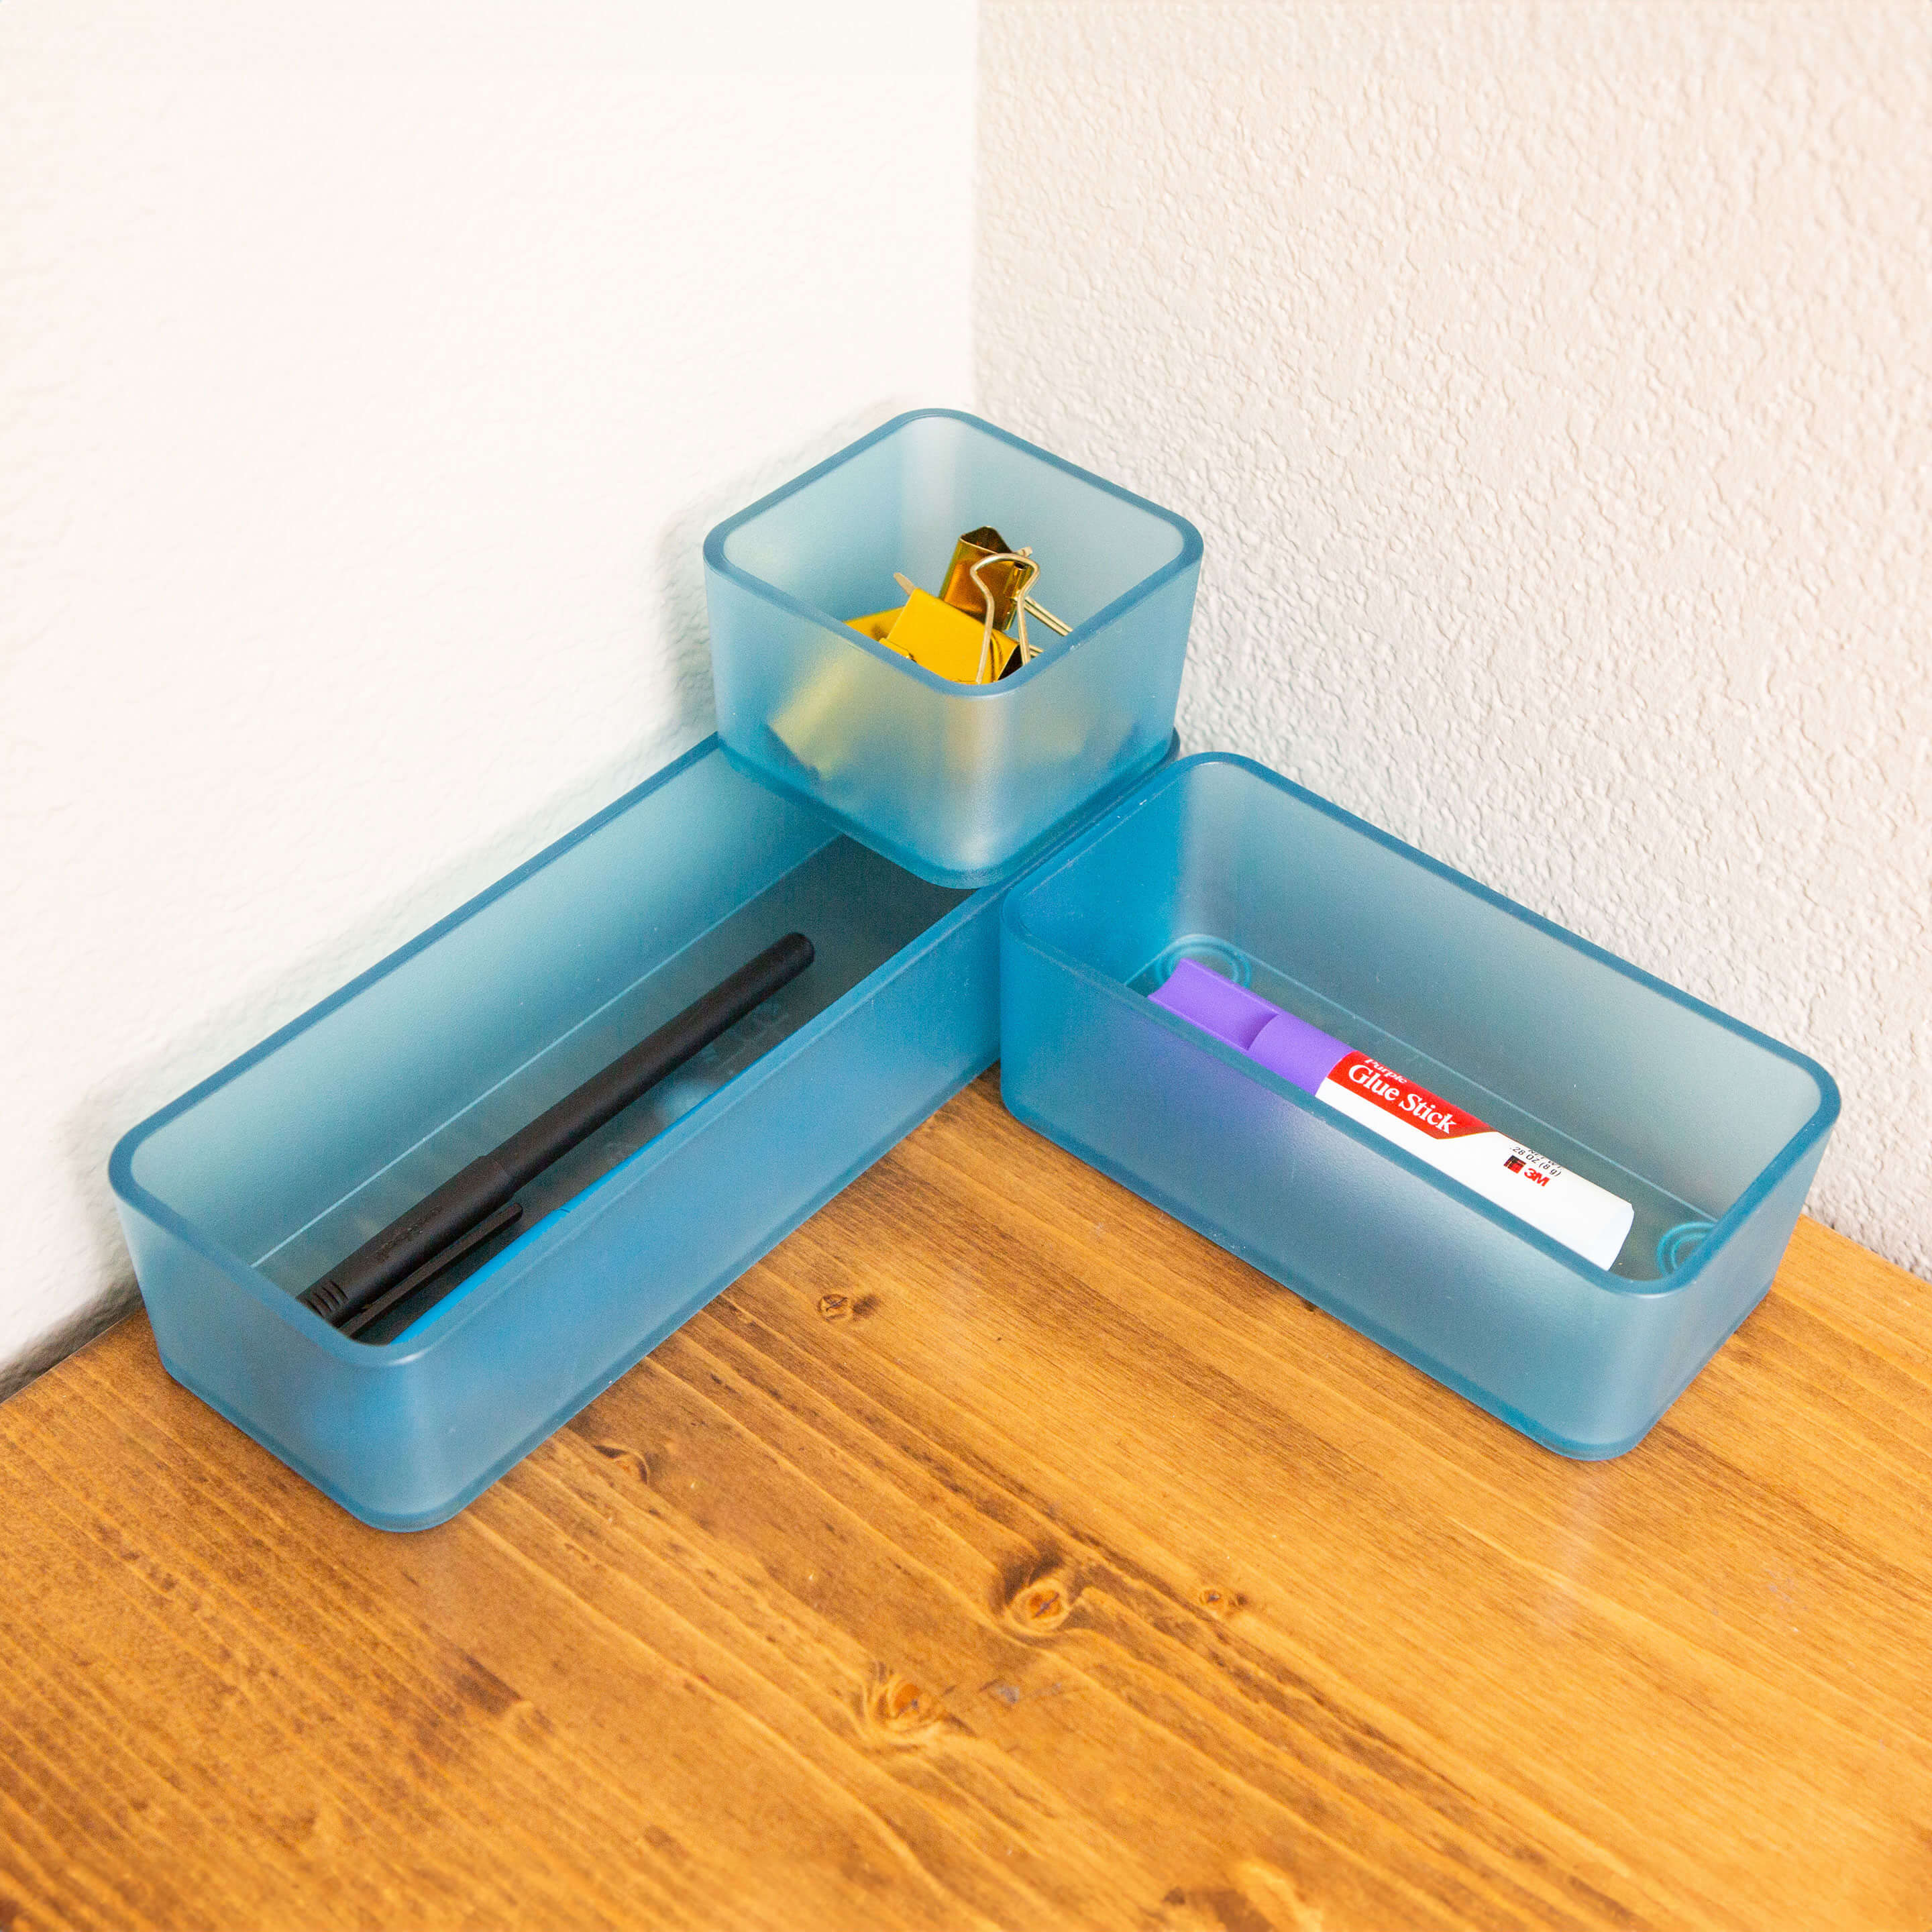 reSTAK recycled stackable organizing bins set of 3